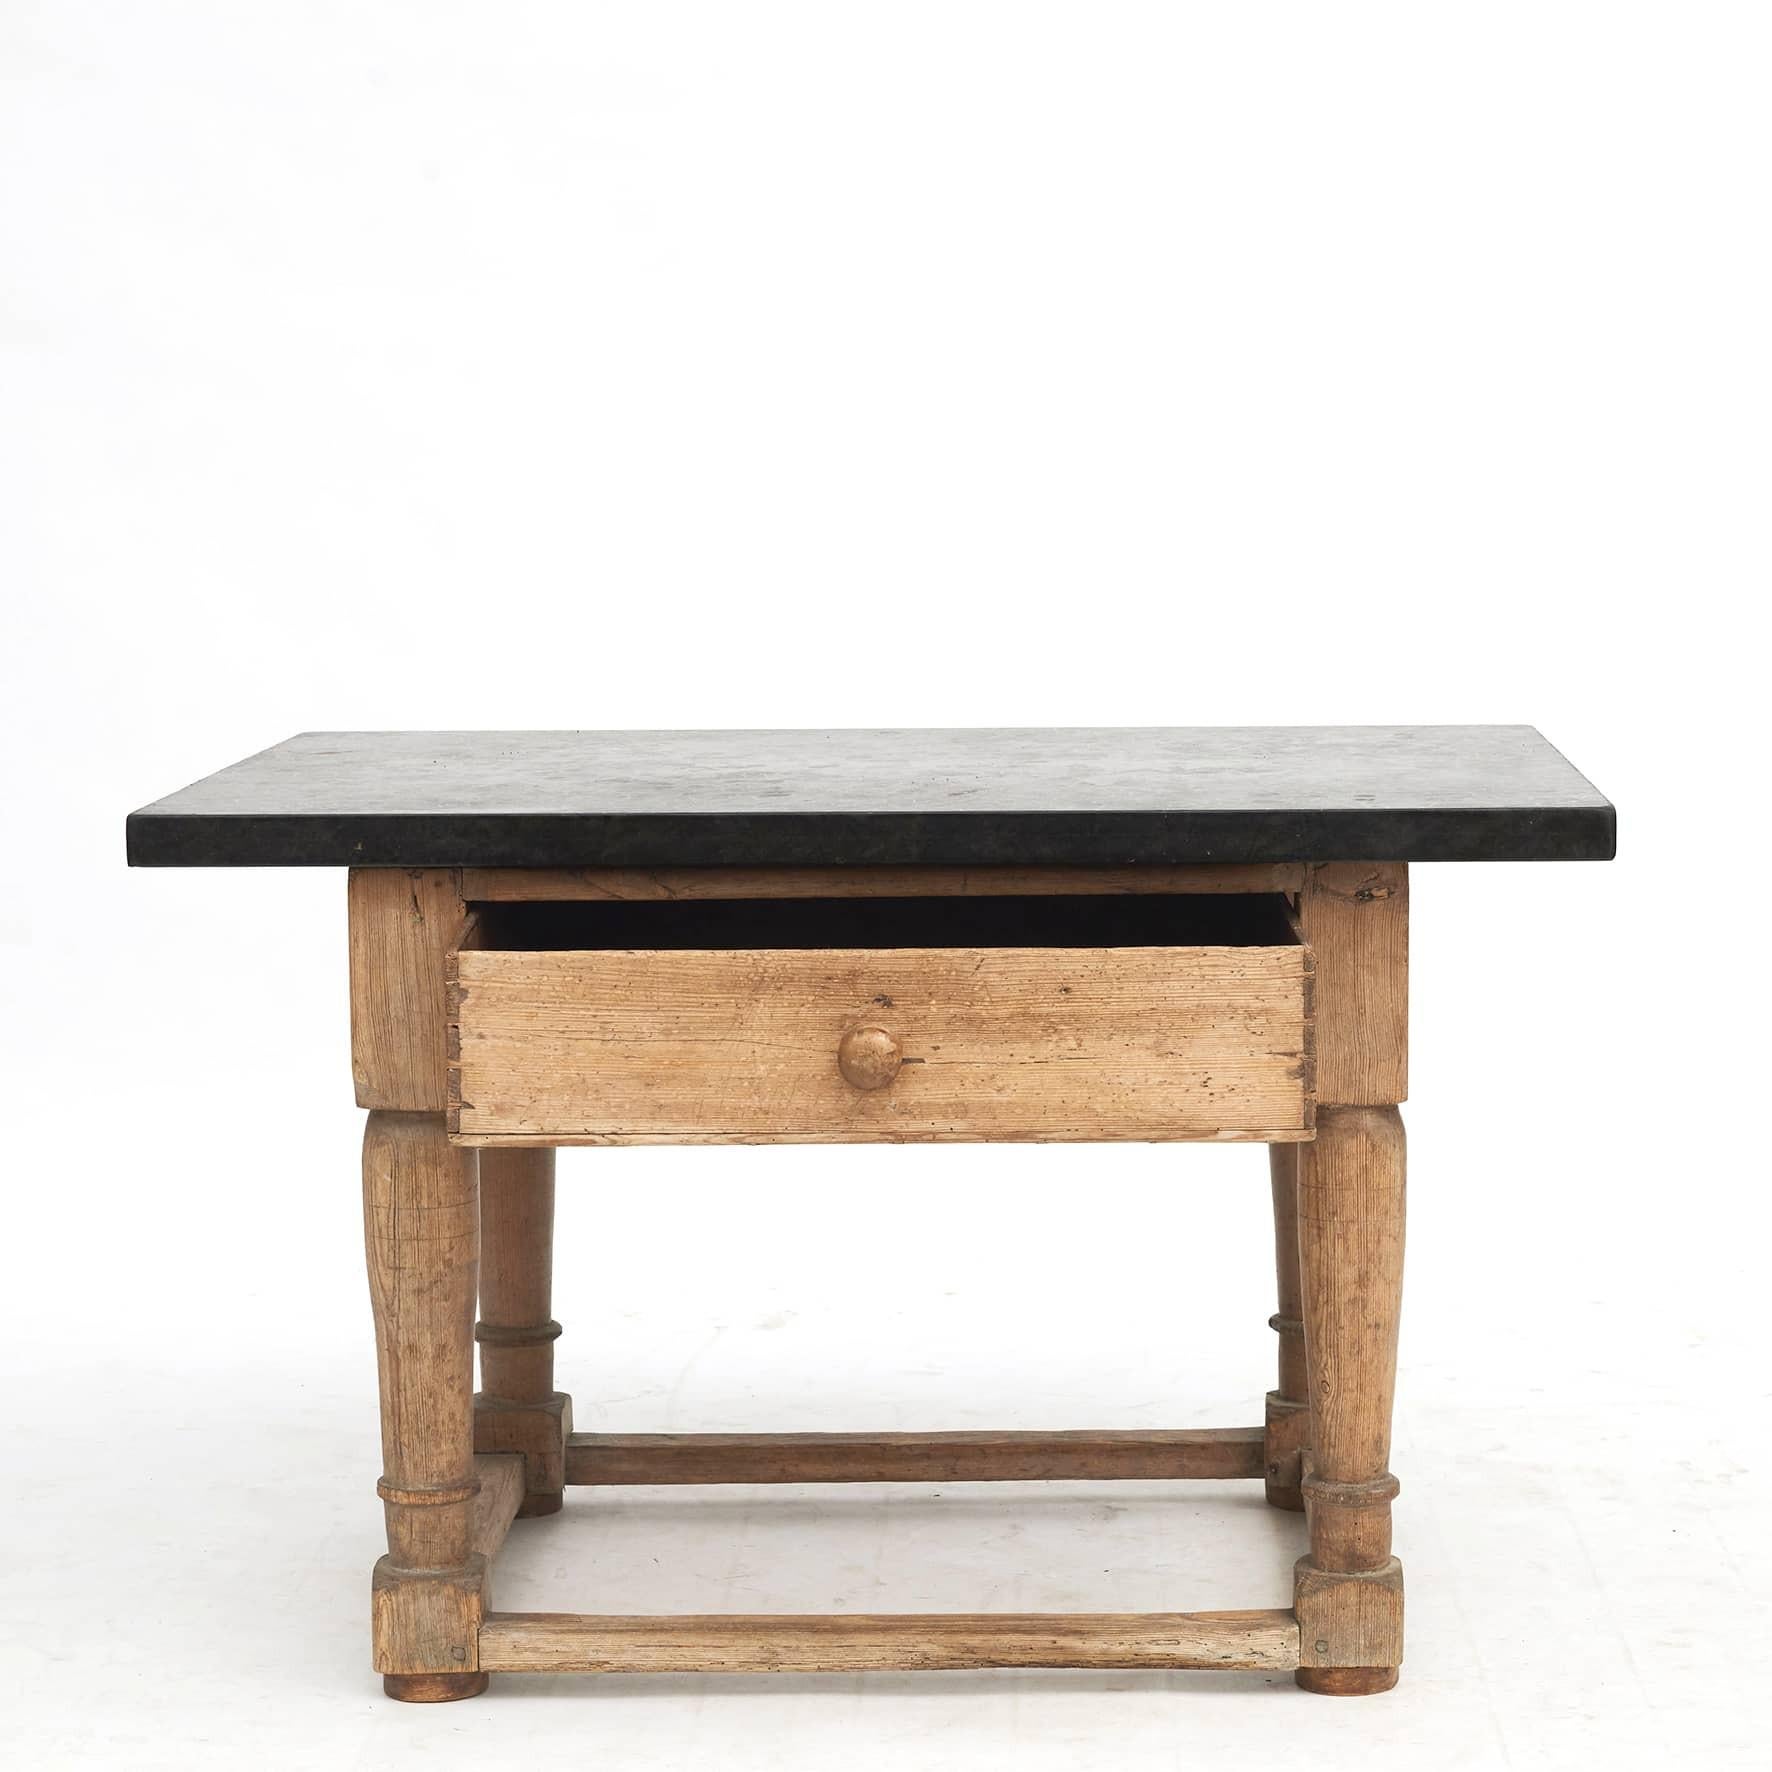 Swedish baroque table with black Jämtland limestone top. Front with drawer.
Sweden c. 1750.

Jämtland, a region in central Sweden, contains several layers of limestone in the folded mountains. Jämtland limestone is approx. 465 million years old